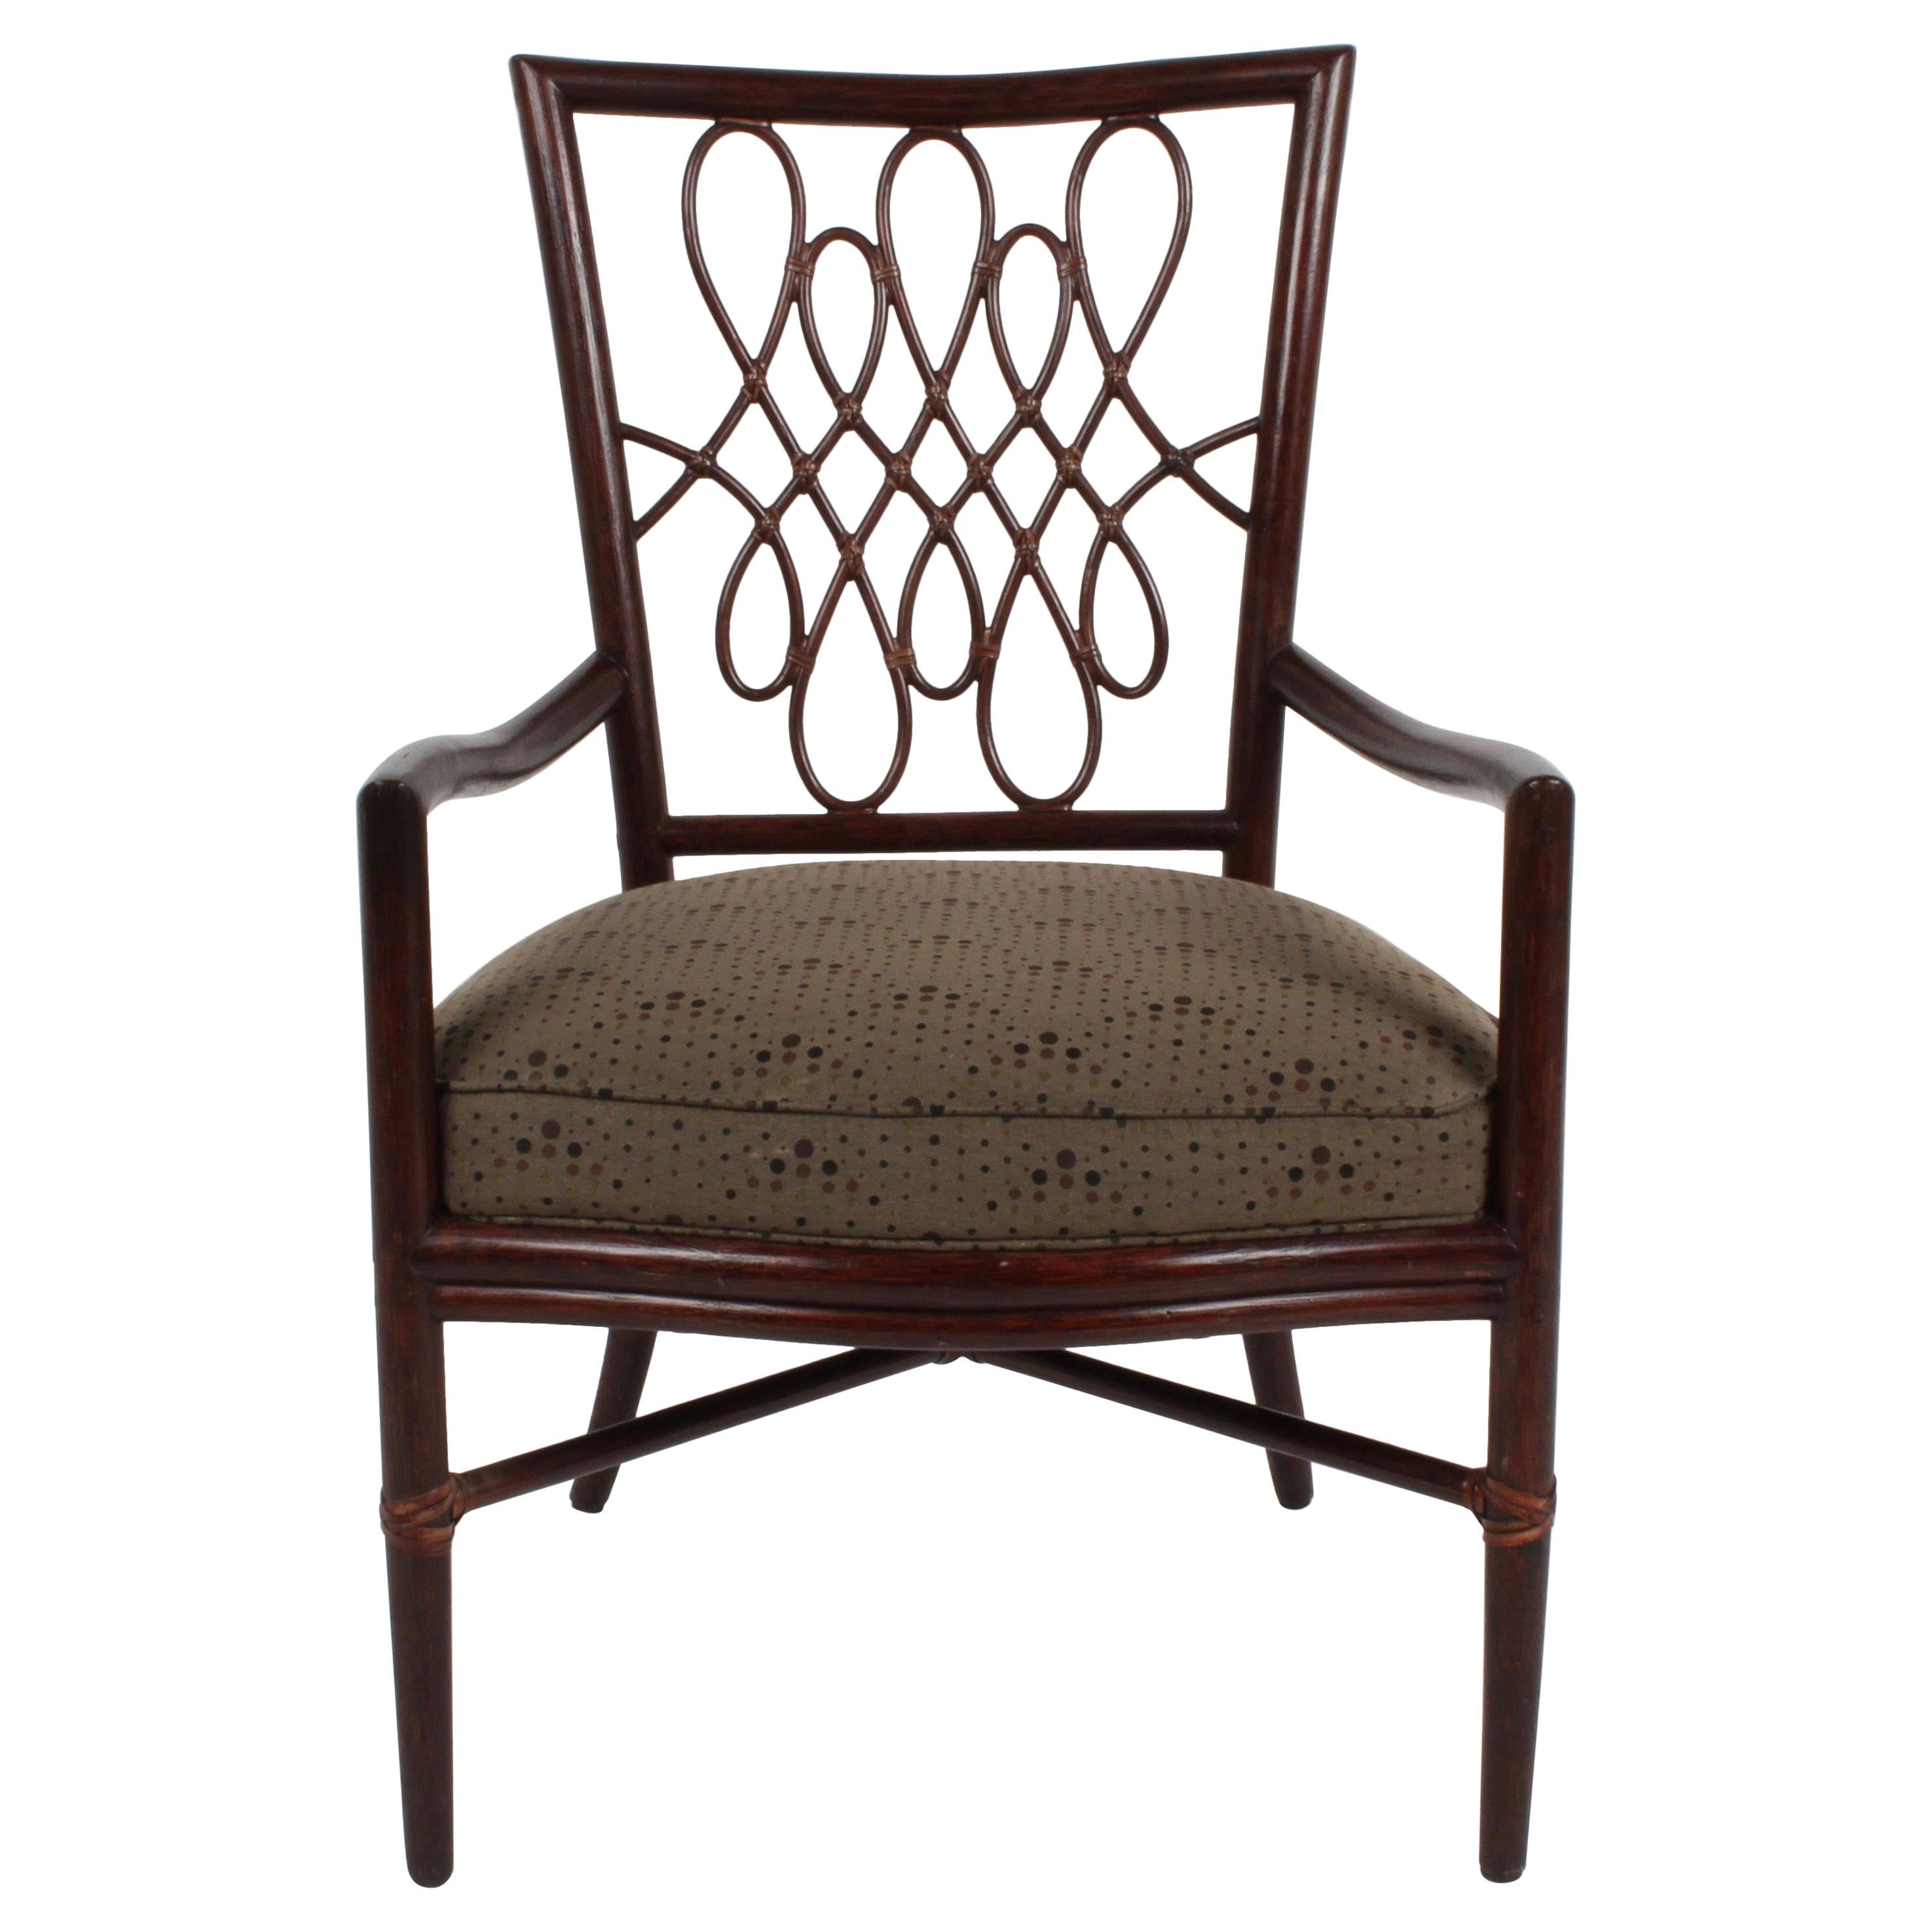 Barbara Barry for McGuire Rattan or Wicker Arm Desk, Dining or Occasional Chair For Sale